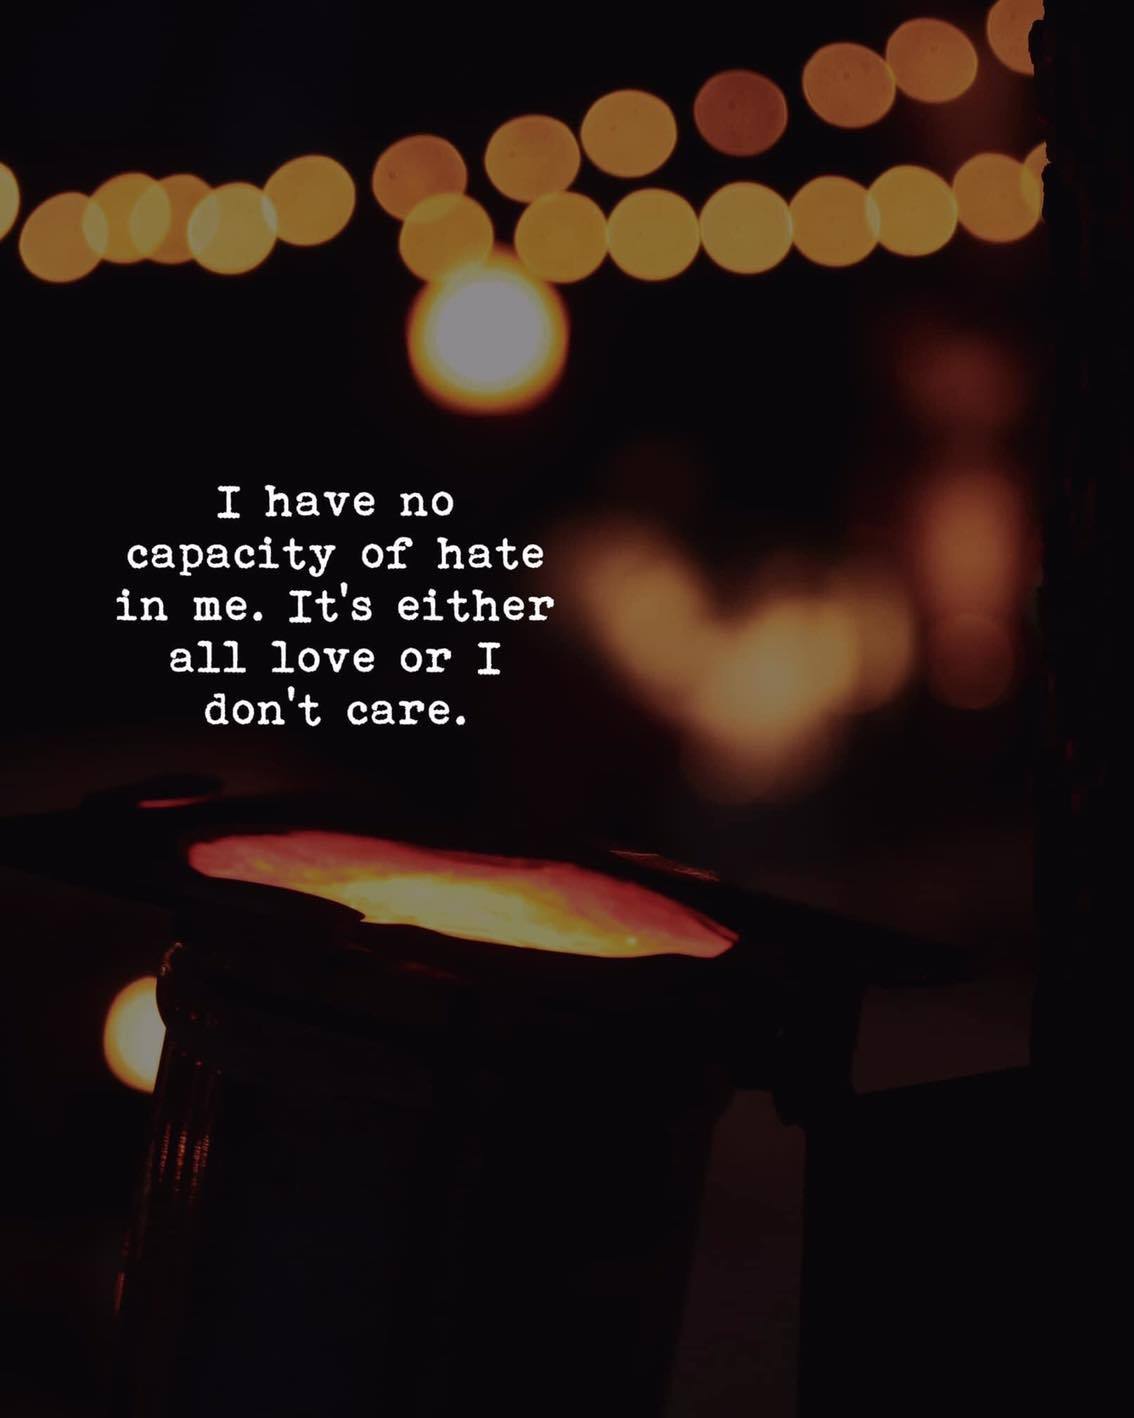 Quotes 'nd Notes - I have no capacity of hate in me. It's either ...